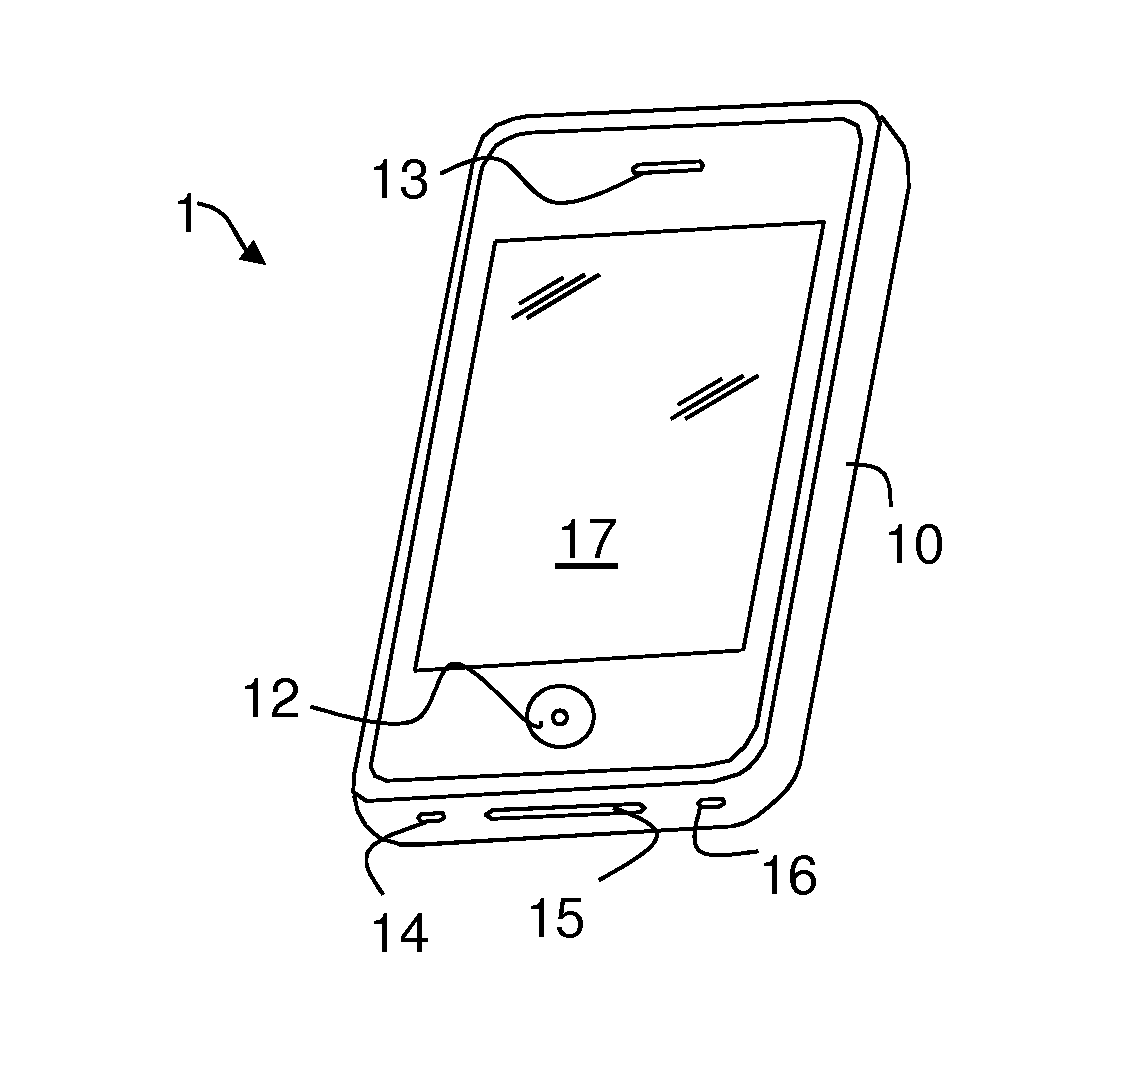 Calibration of a chemical sensor in a portable electronic device